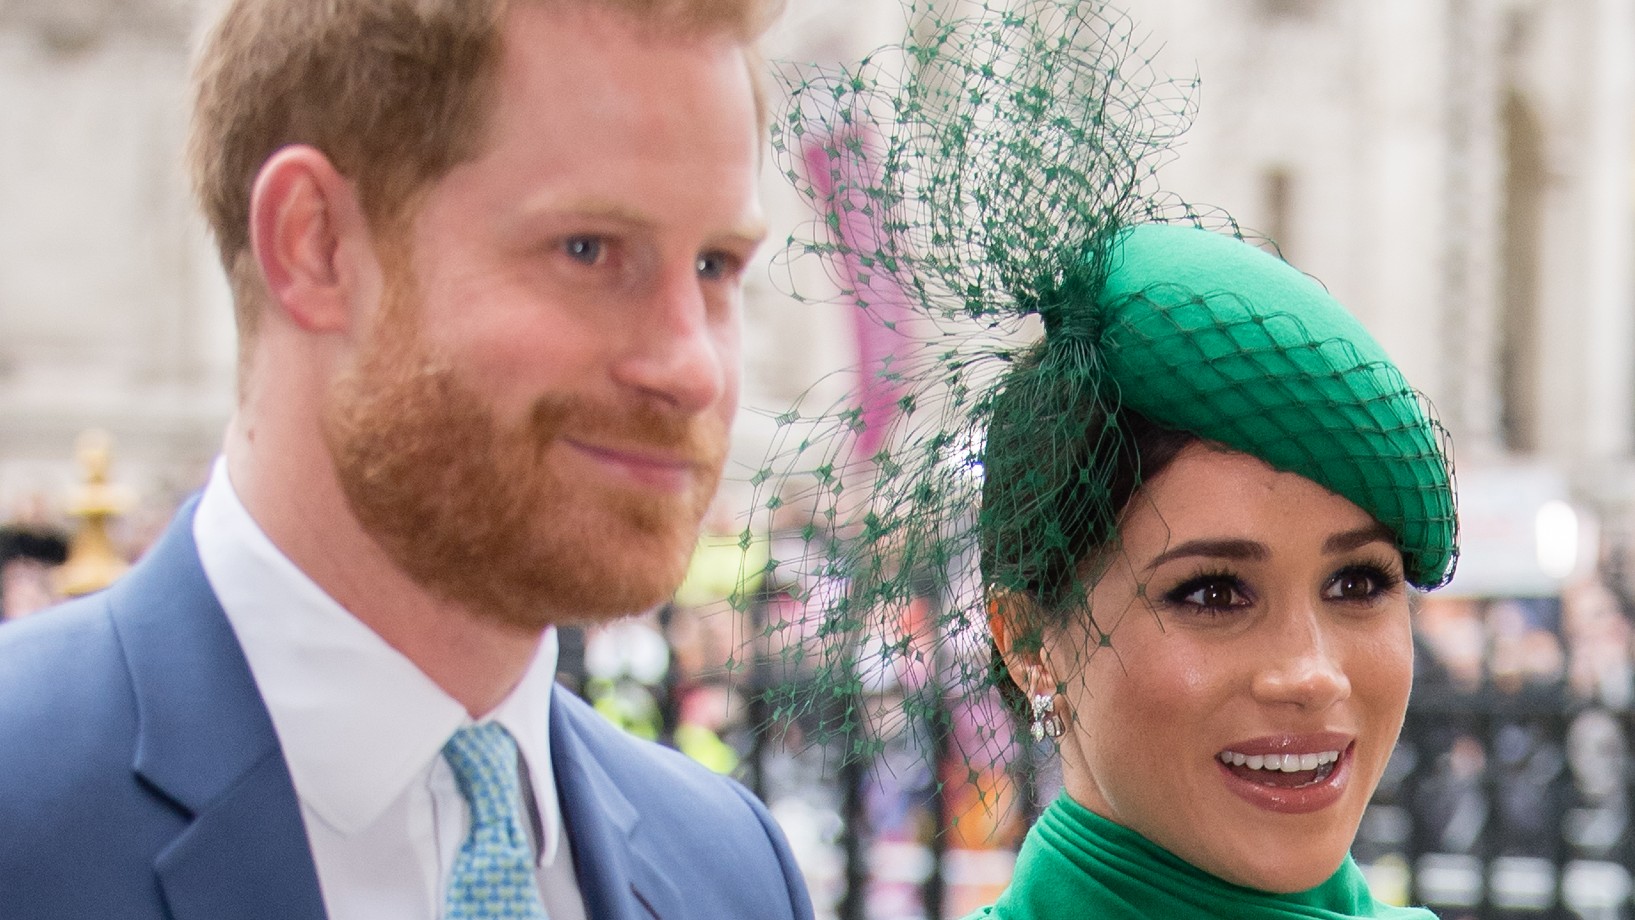 Despite Their Requests, Prince Harry and Meghan Markle Have “No Chance” of Appearing on the Buckingham Palace Balcony After King Charles’ Coronation, Royal Expert Says